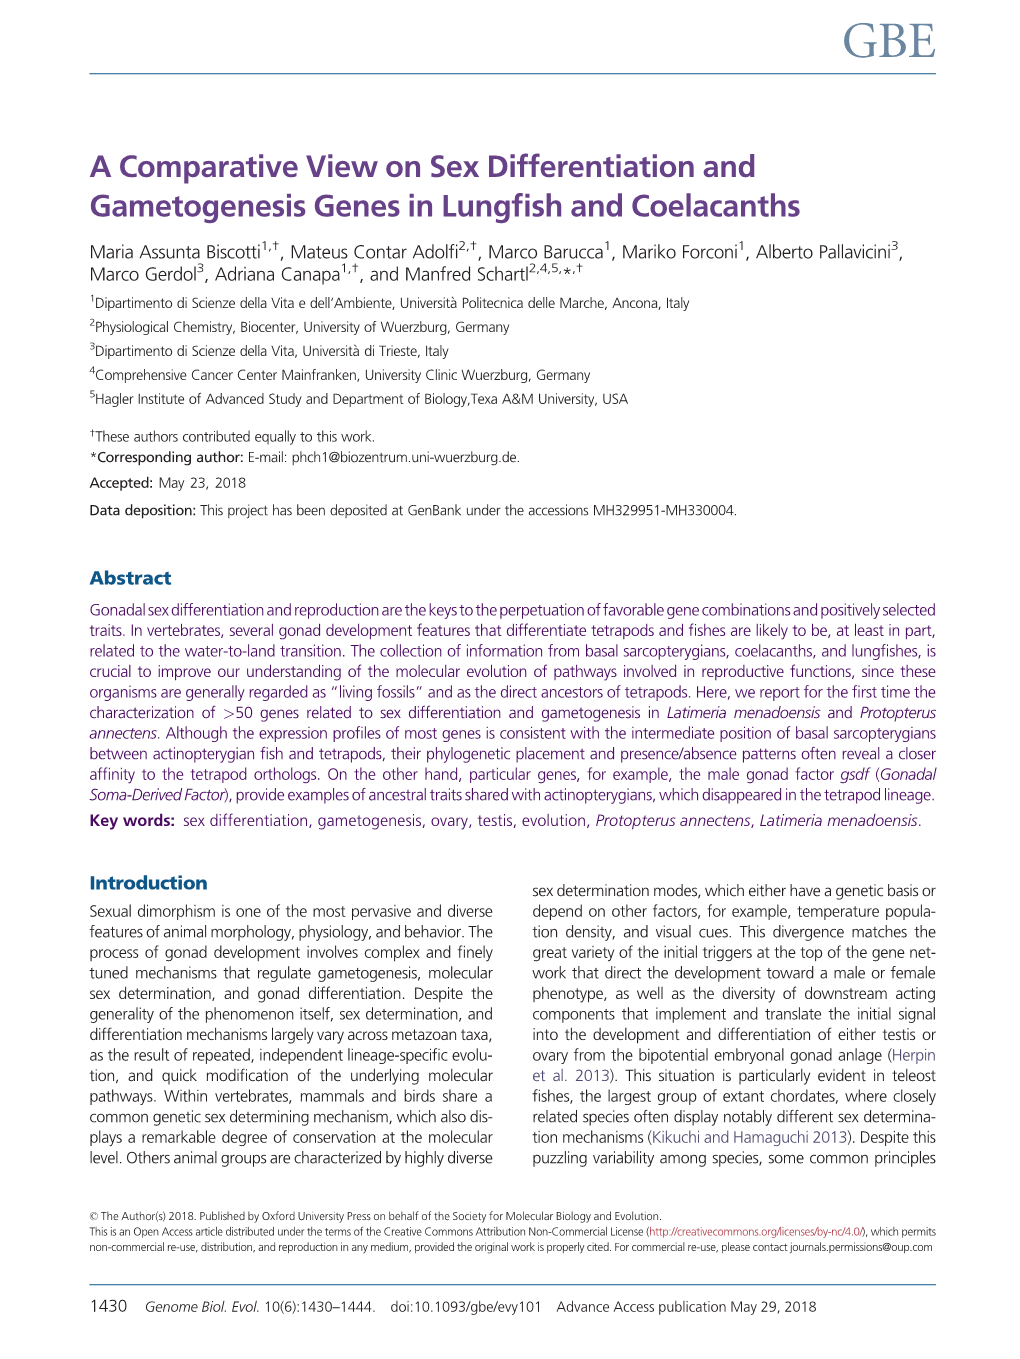 A Comparative View on Sex Differentiation and Gametogenesis Genes in Lungﬁsh and Coelacanths